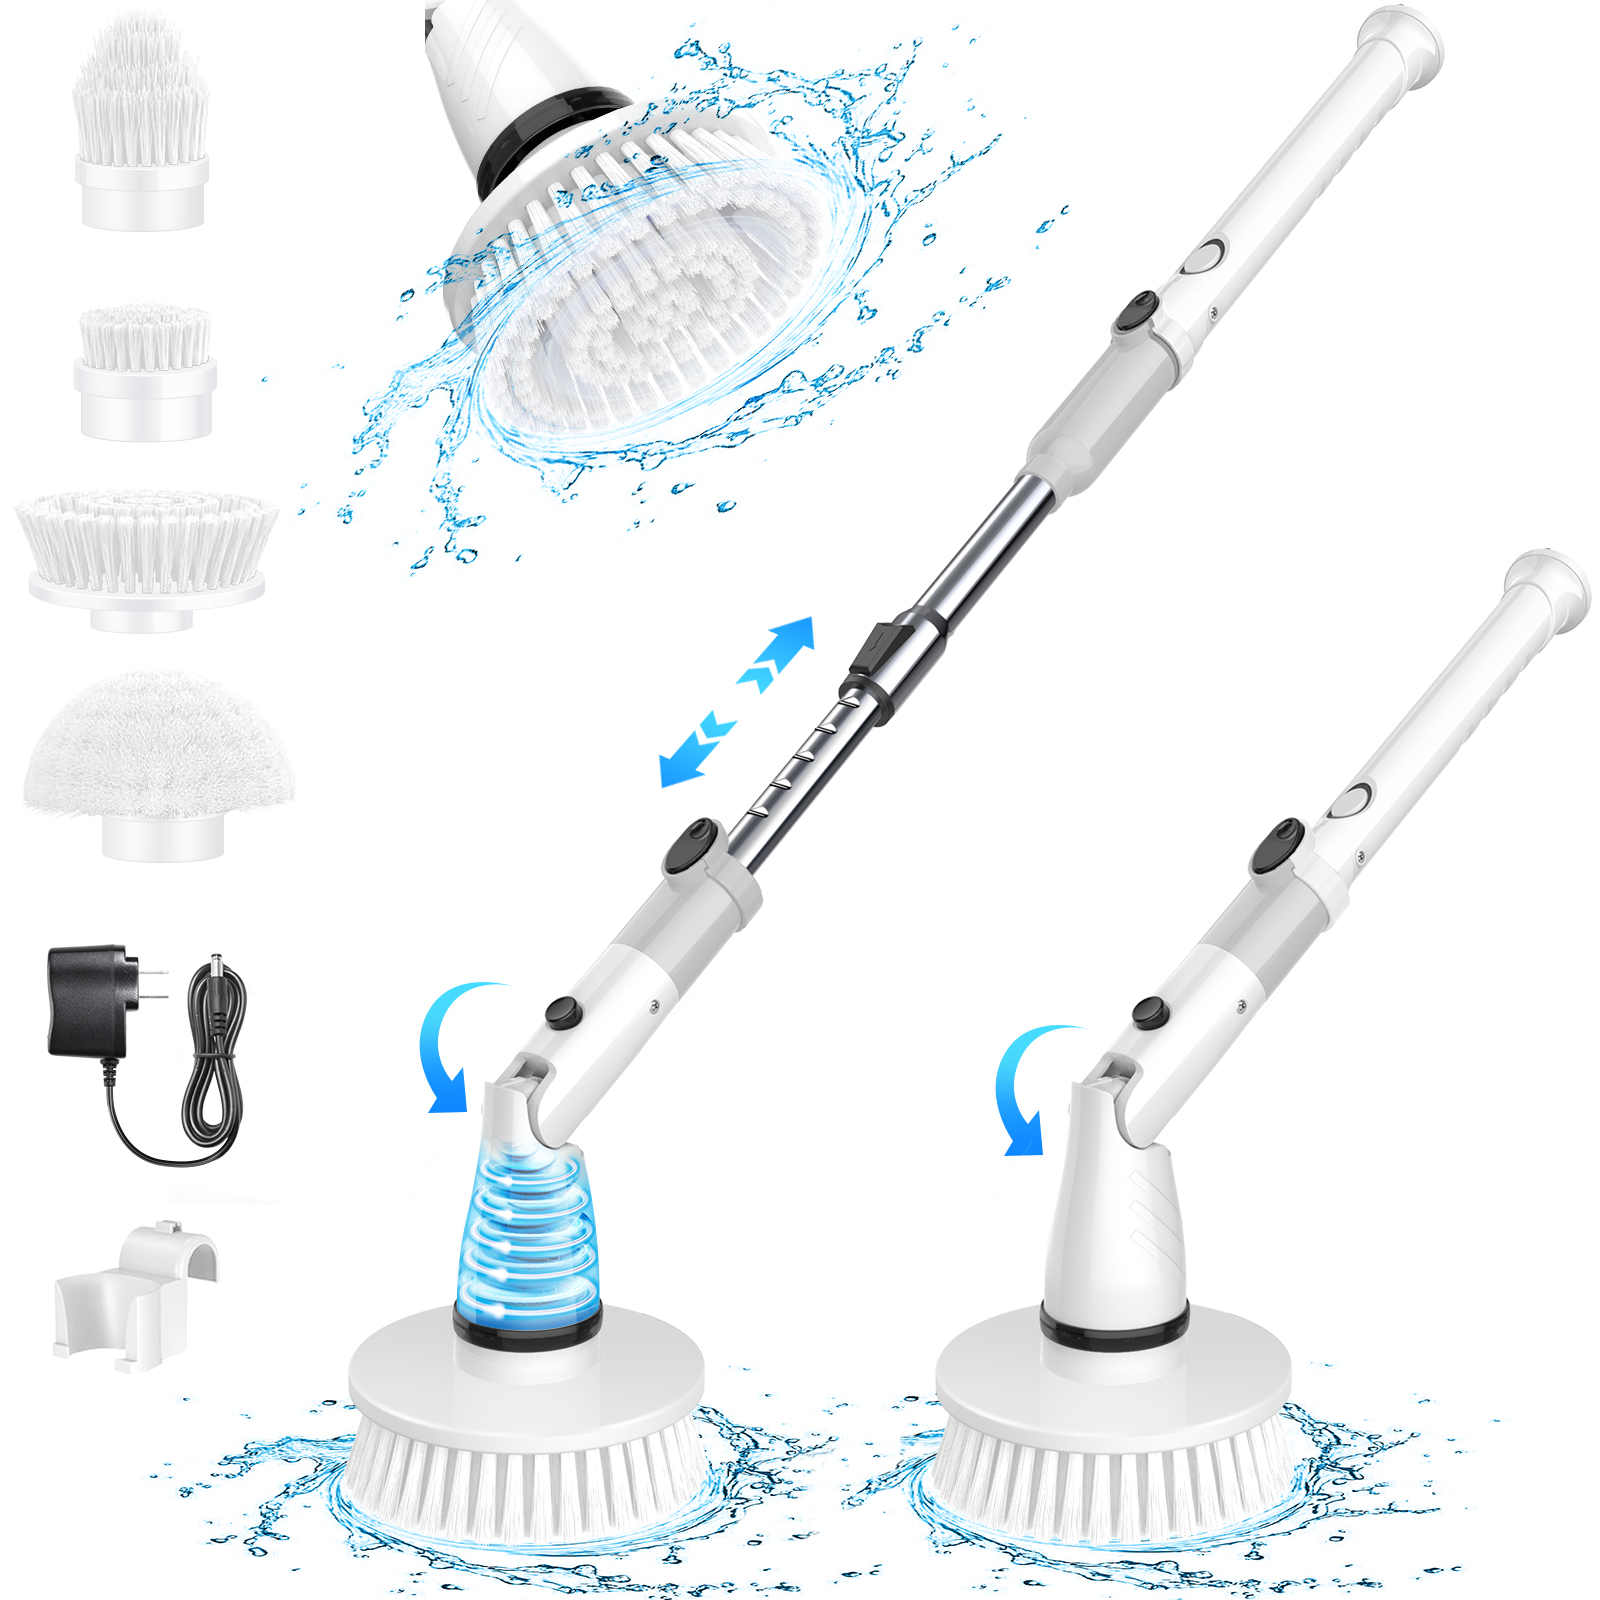 SZRSTH Electric Spin Scrubber - Cordless Cleaning Brush with 4 Heads & Extension Handle Power Shower Scrubber for Bathroom Kitchen Tile Floor - image 1 of 8